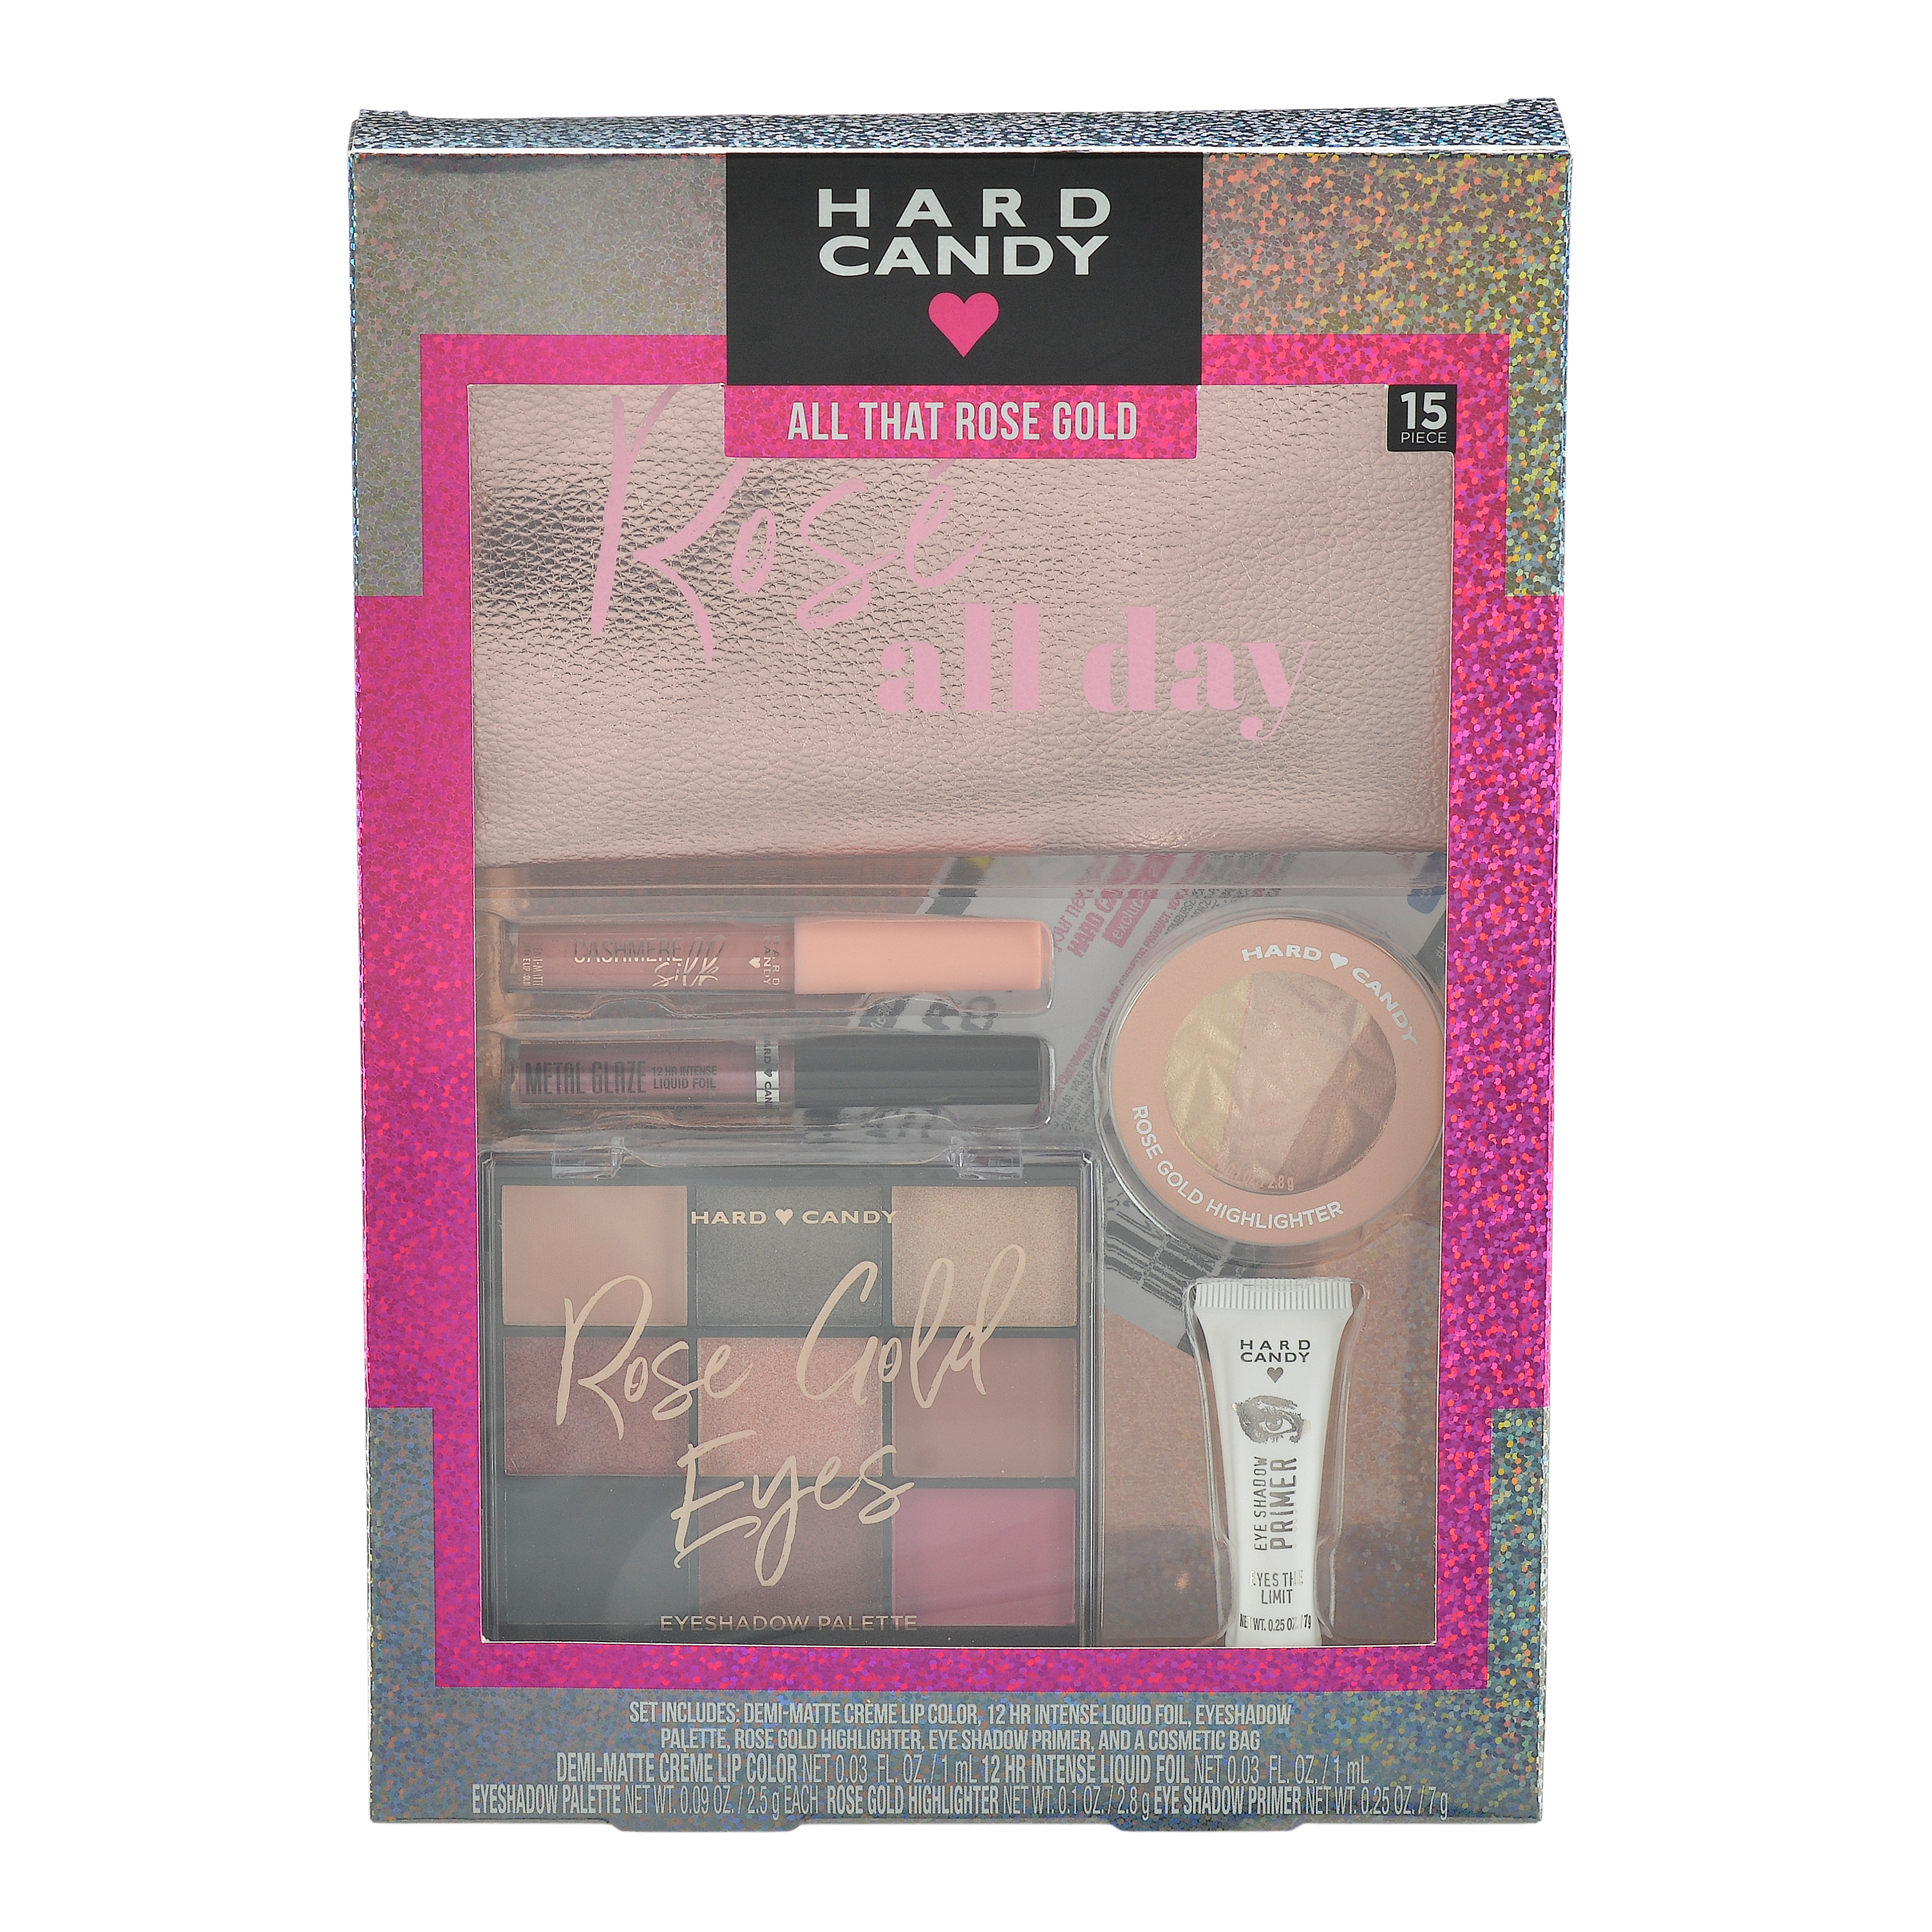 Hard Candy Holiday Makeup Gift Set, All That Rose Gold - image 1 of 3